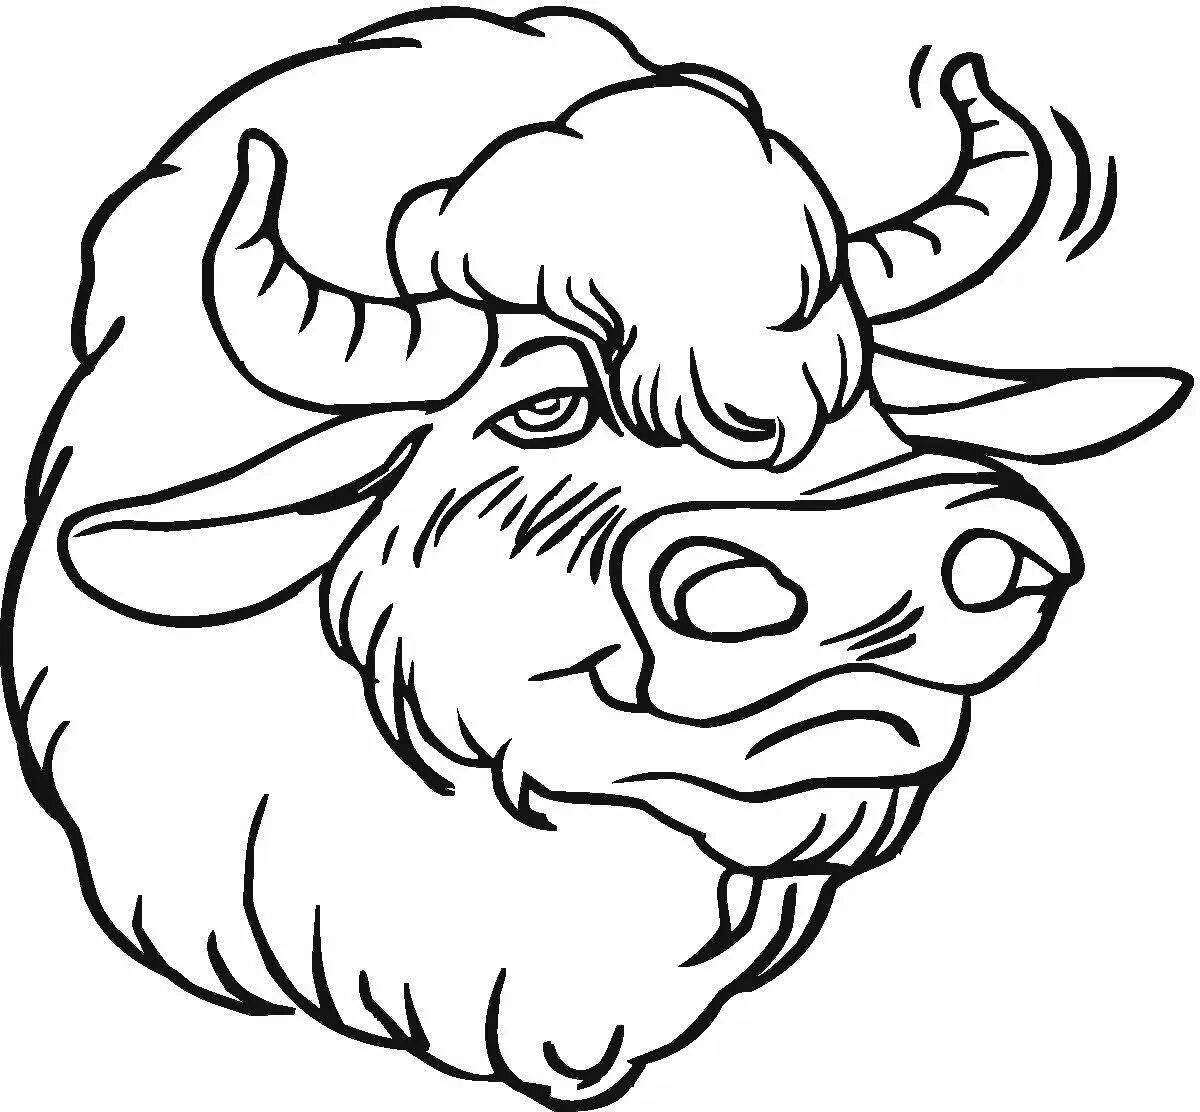 Coloring book bright figurine of a bison